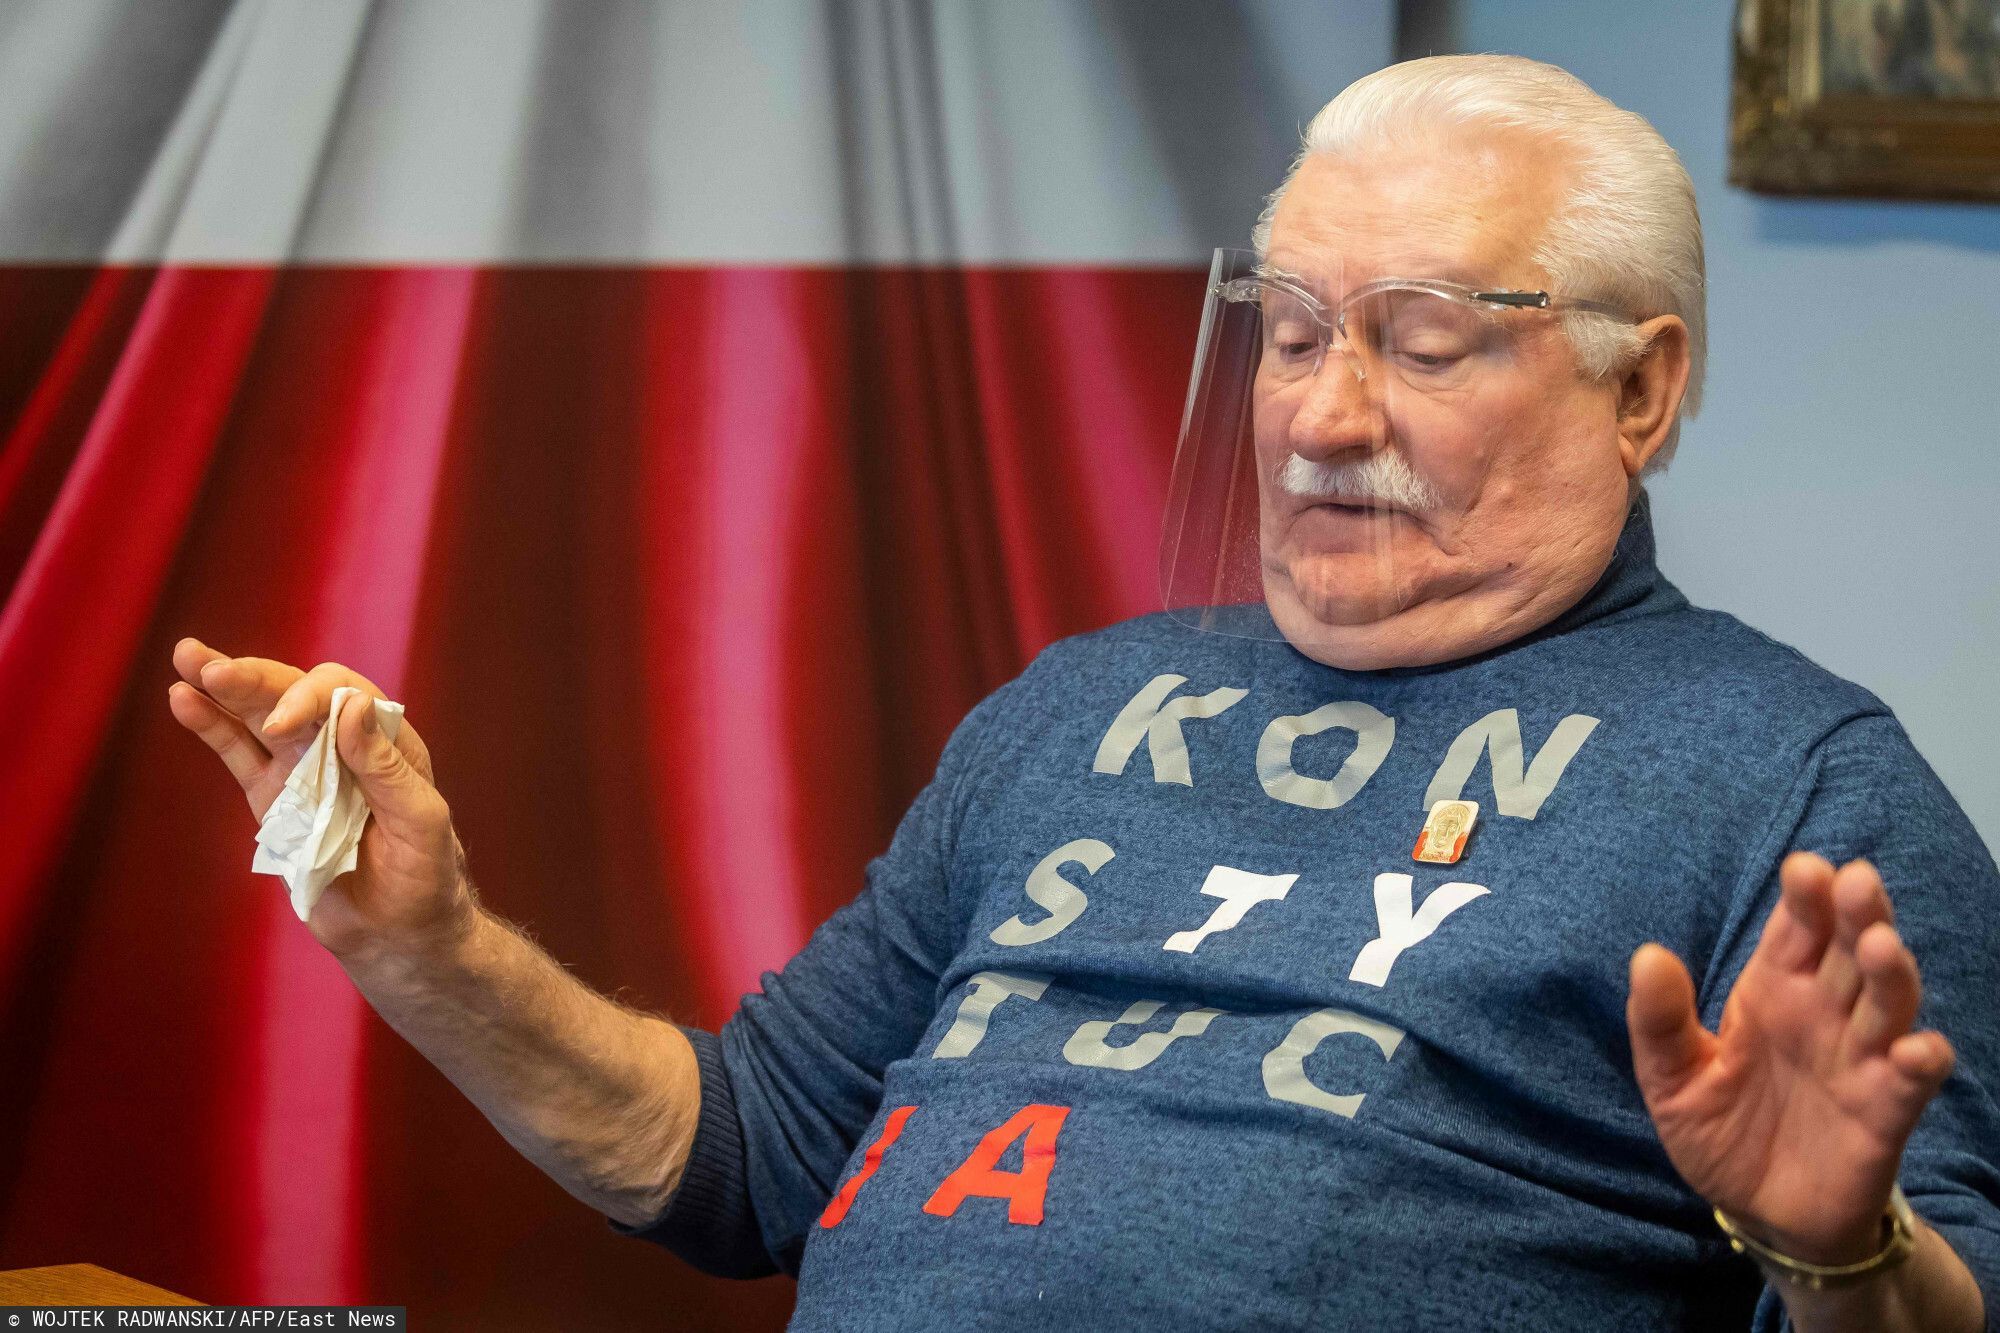 Lech Walesa, fomer president of Poland and Nobel Prize for peace laureate, is pictured on February 3, 2021 during an interview in his office in Gdansk, Poland. - Polish freedom icon and Nobel laureate Lech Walesa on Wednesday said Russian opposition figur